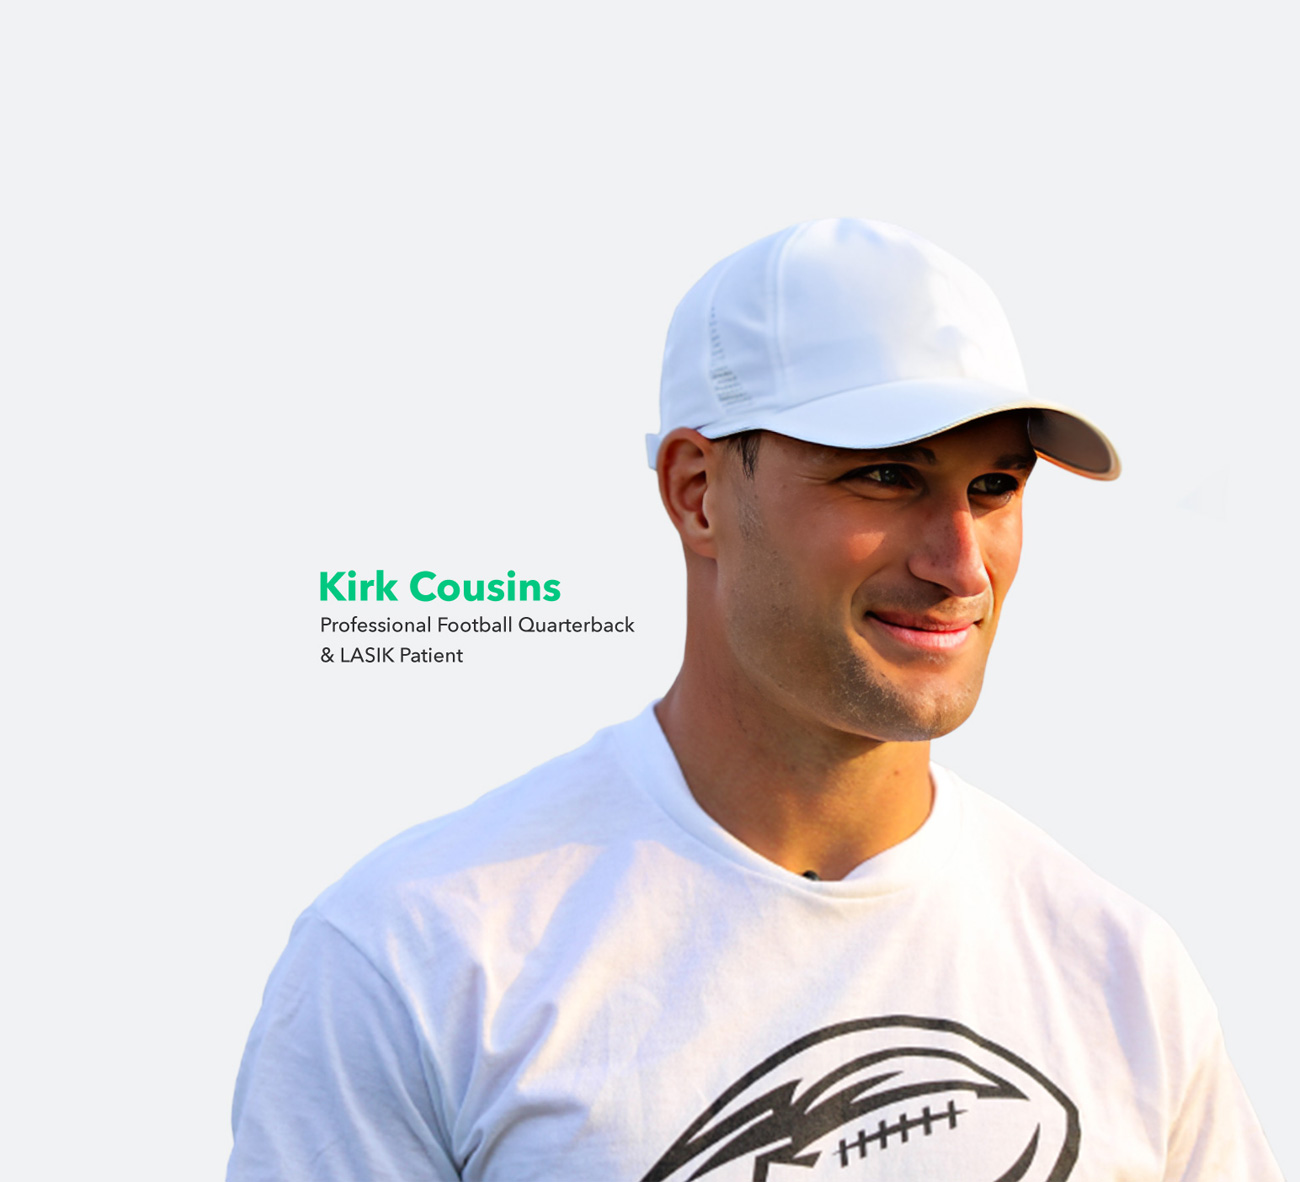 Kirk Cousins, Pro Football Player and LASIK Patient